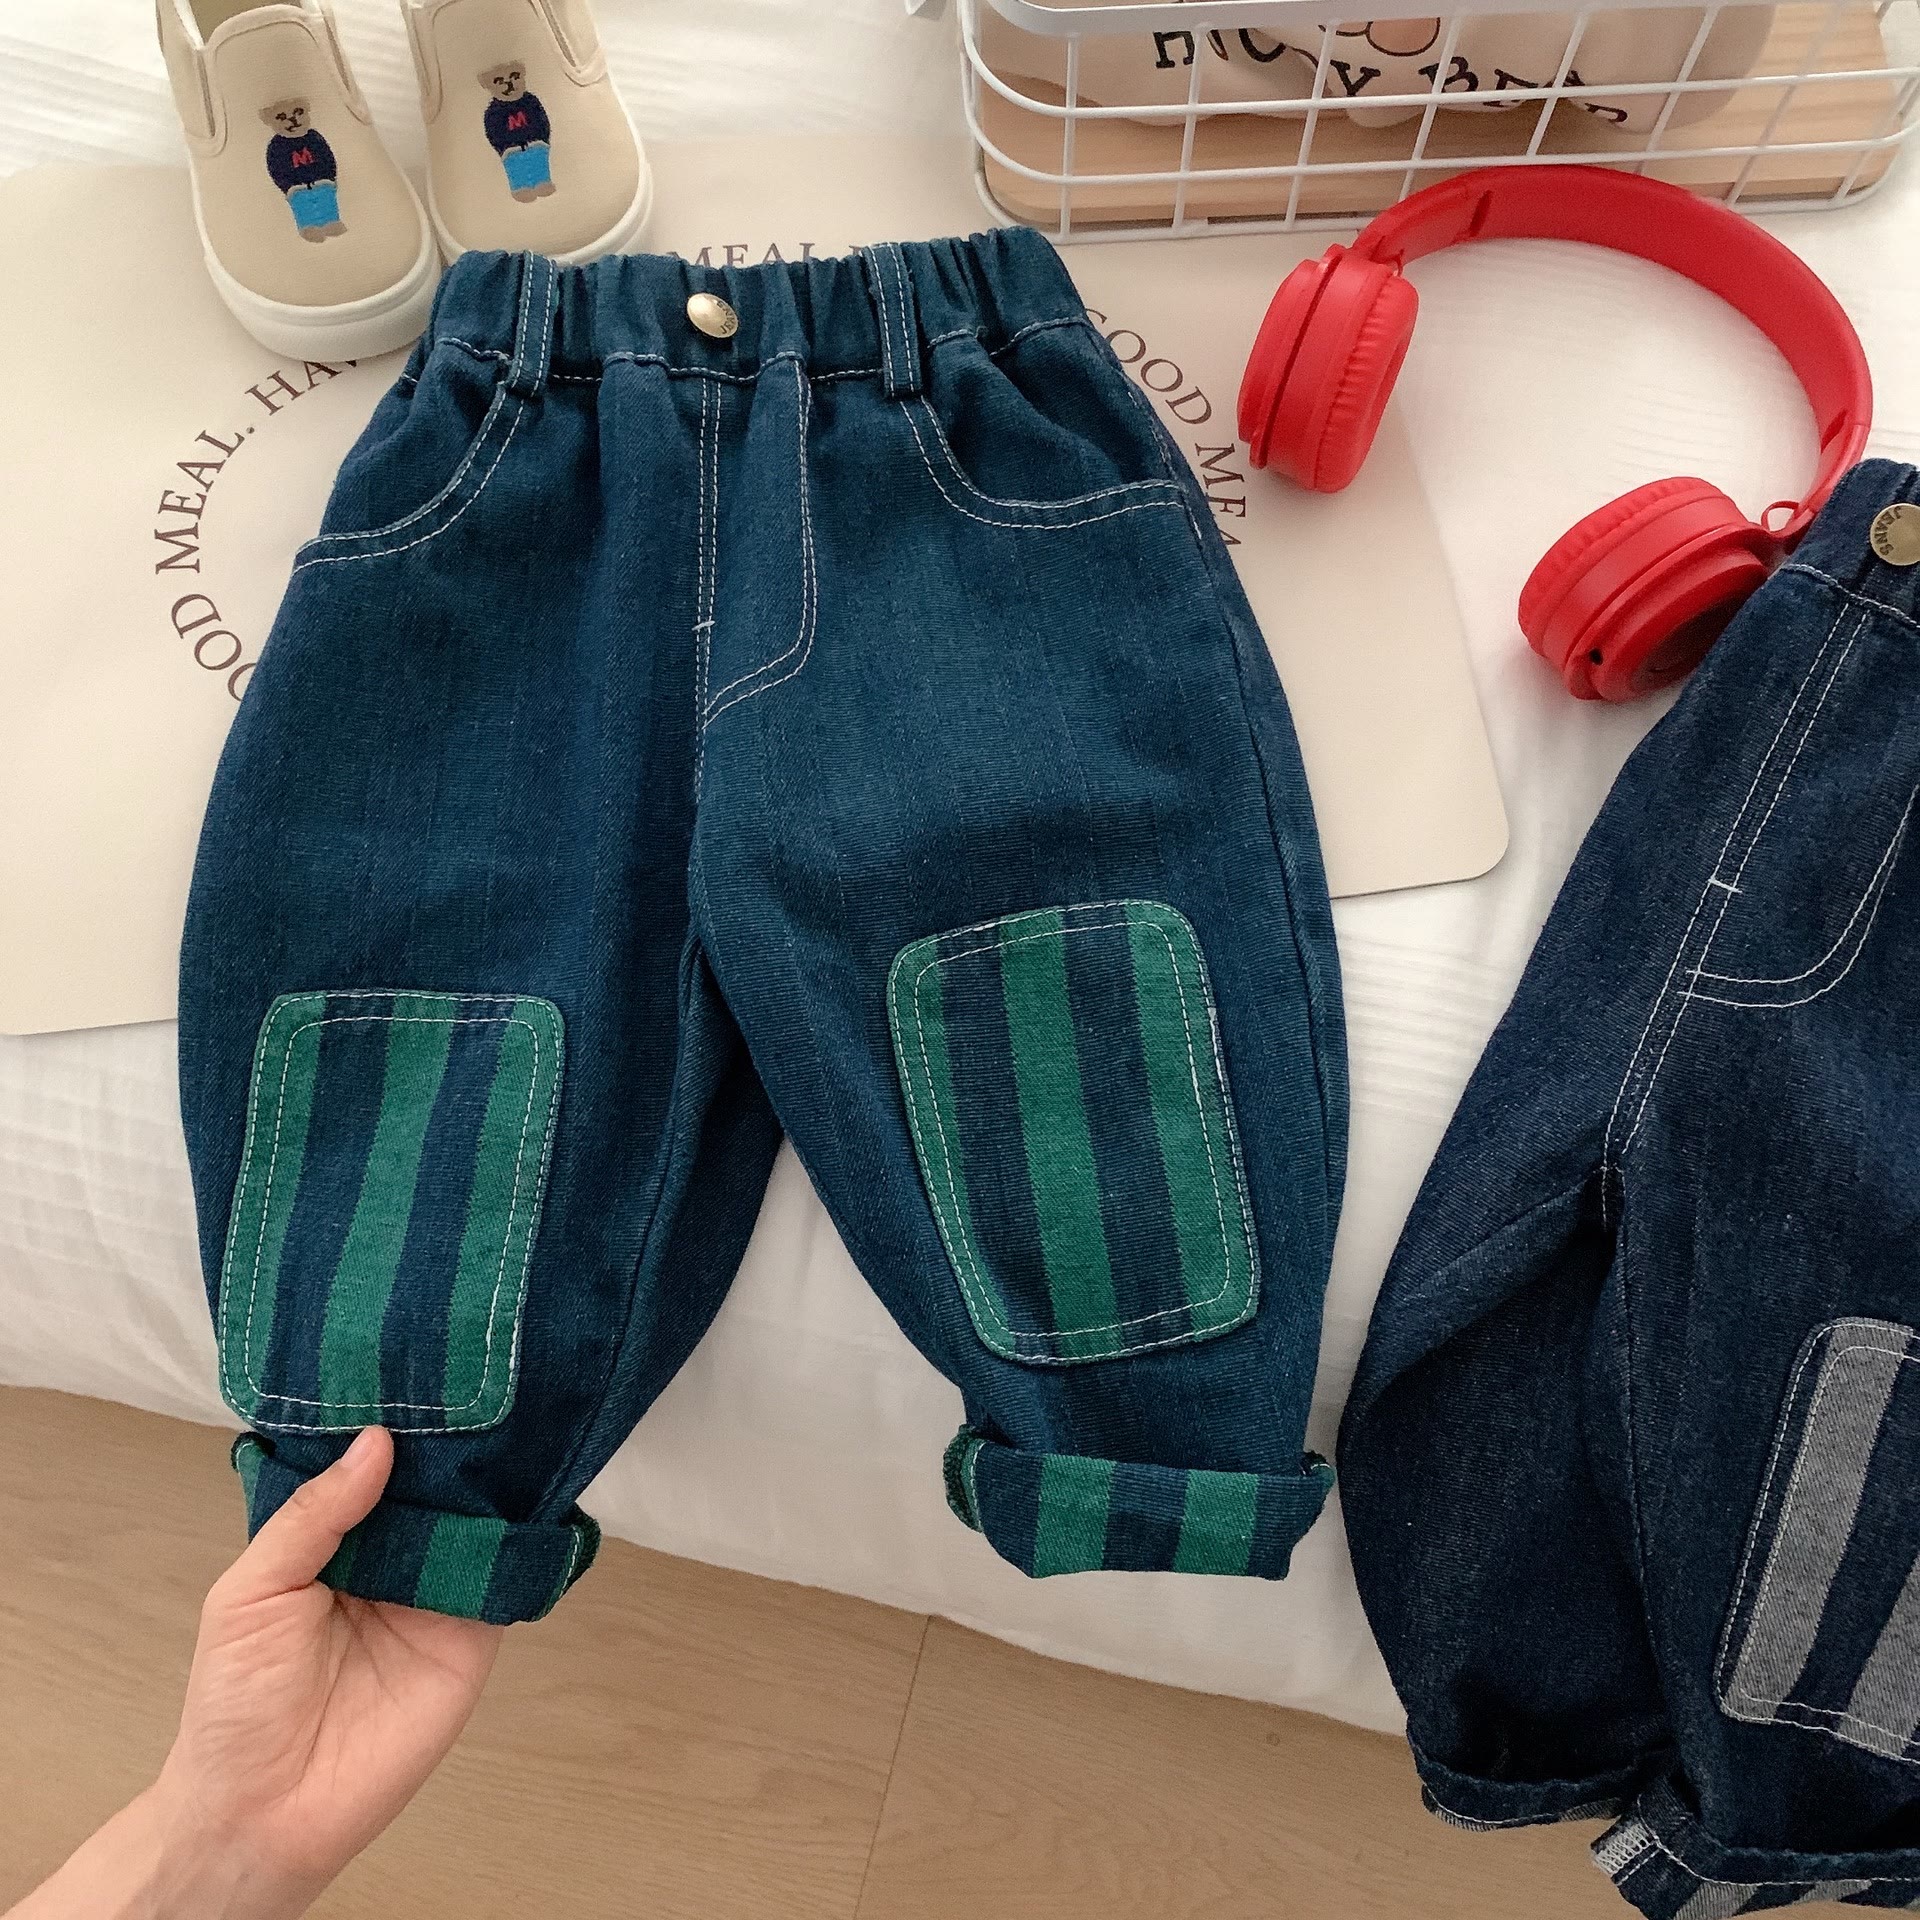 Classic Bowboy Boys Jeans For Infants And Kids Casual Denim Trousers For  Boys, Sizes 4 12 Years 230306 From Kong06, $18.14 | DHgate.Com